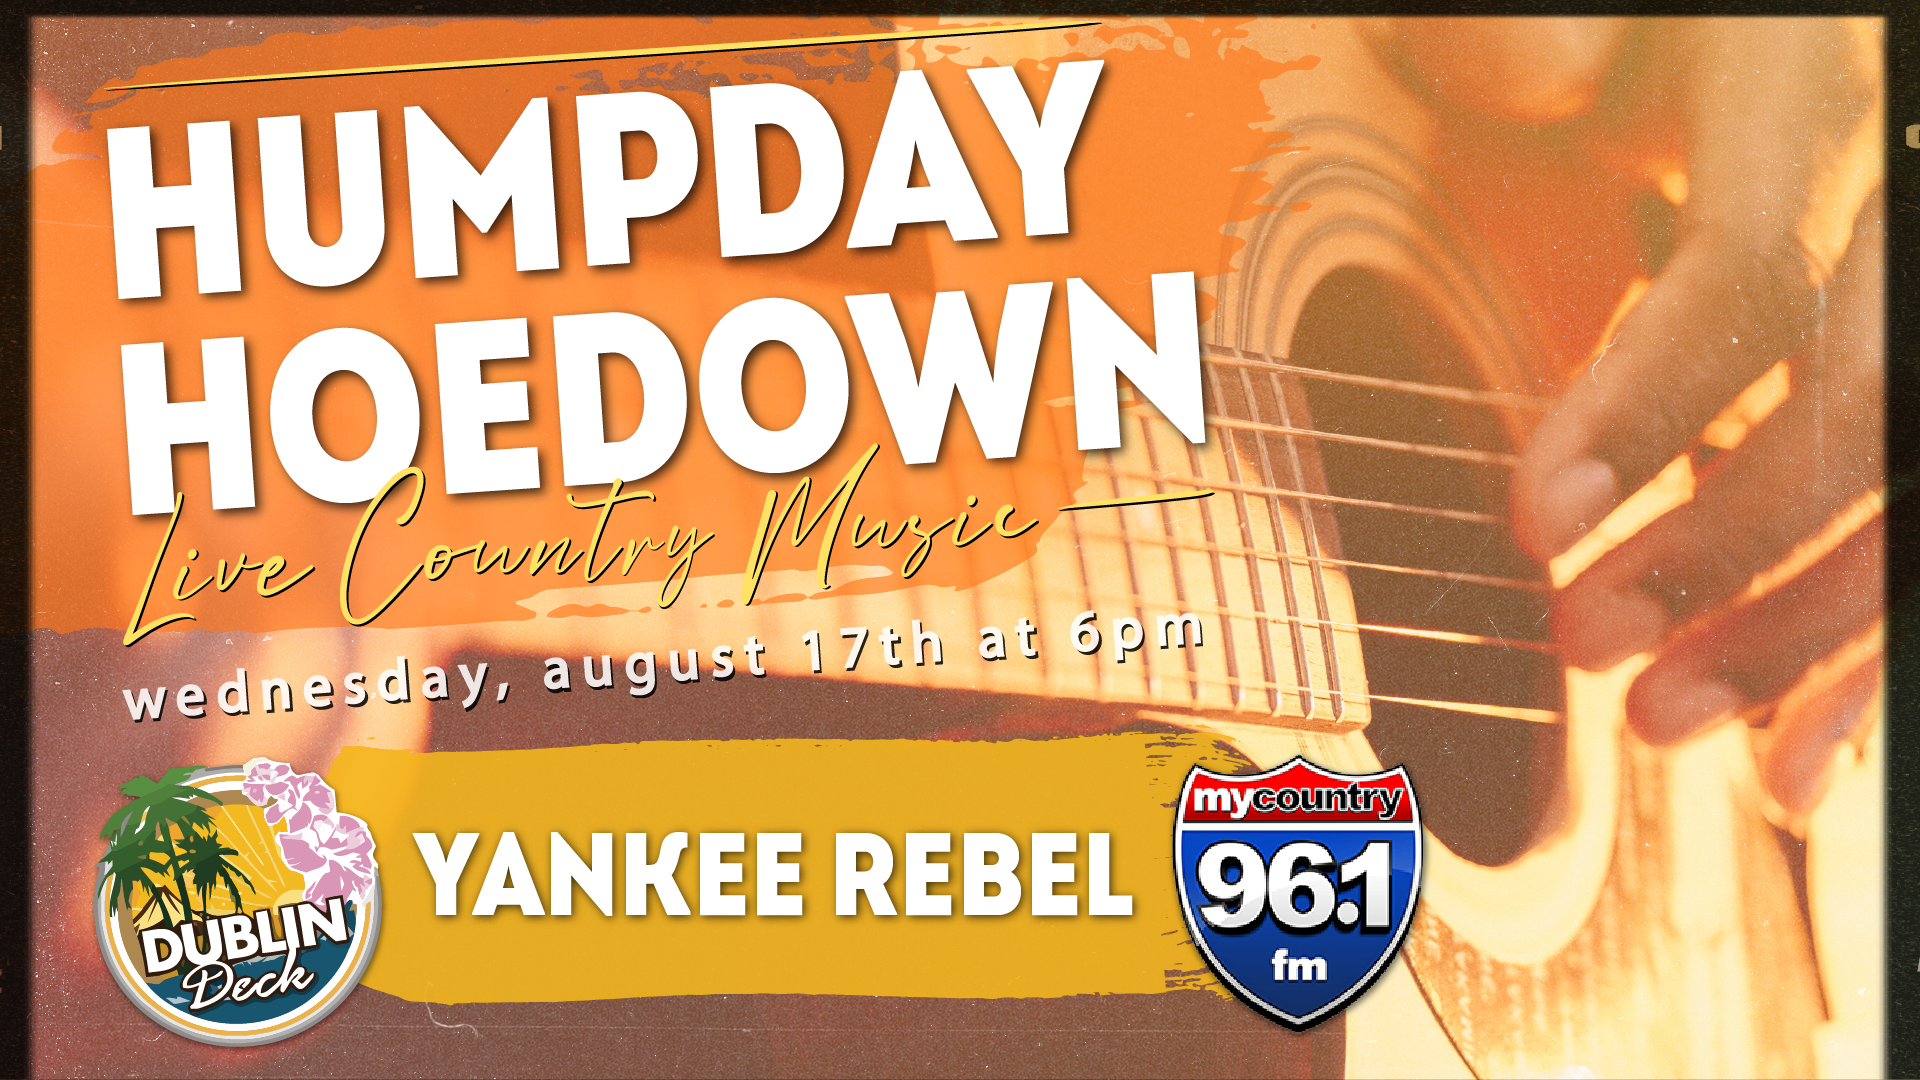 Giddy up and head to Dublin Deck for Humpday Hoedown with Yankee Rebel! Music begins at 6PM